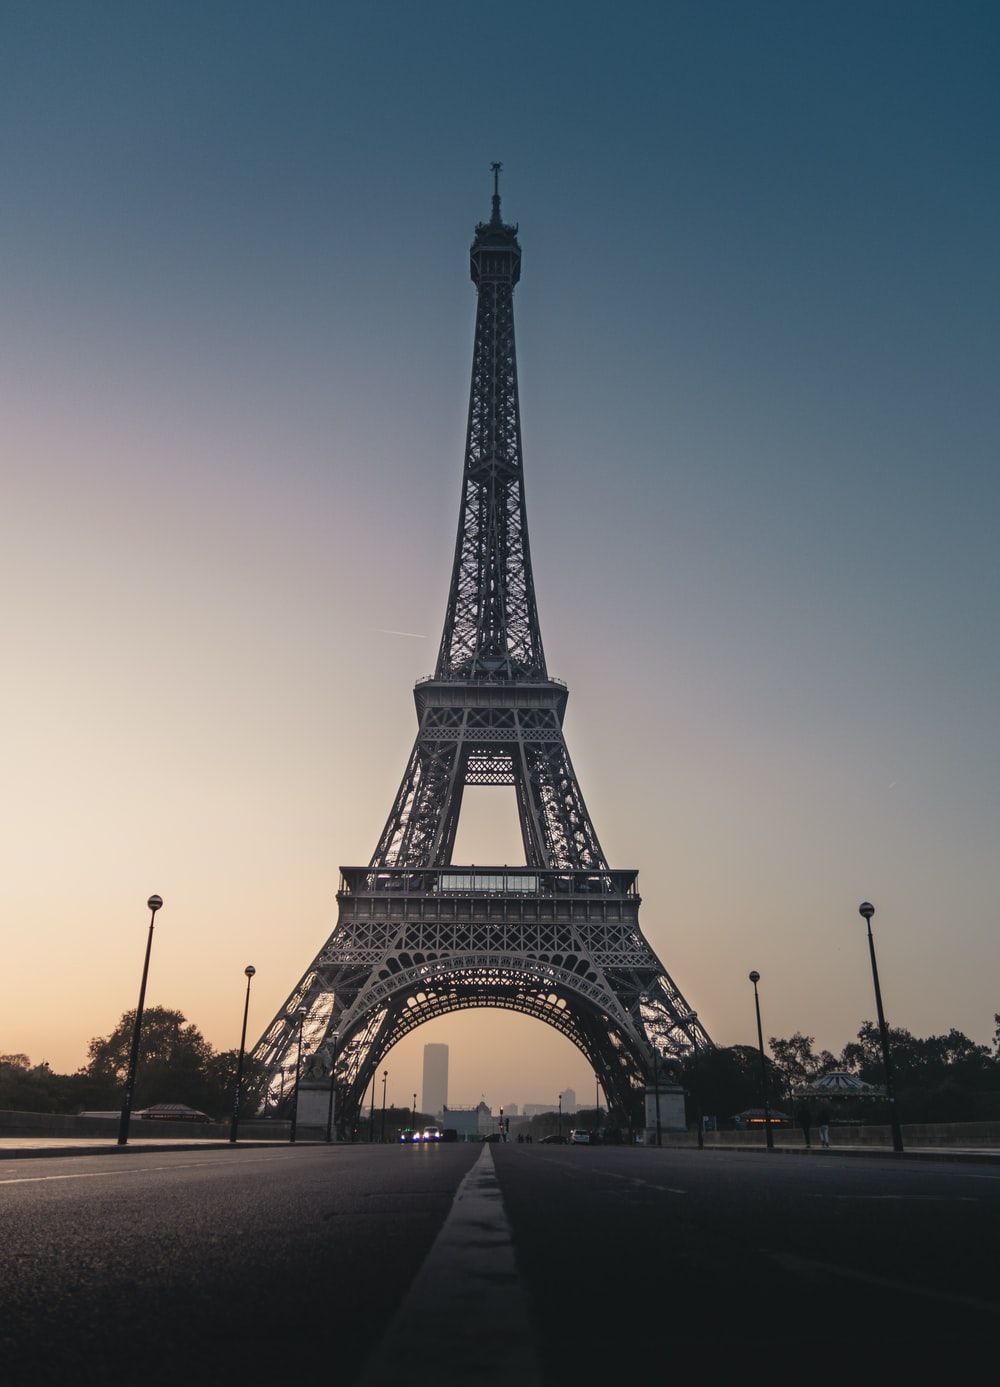 Eiffel Tower Image [HD]. Download Free Image